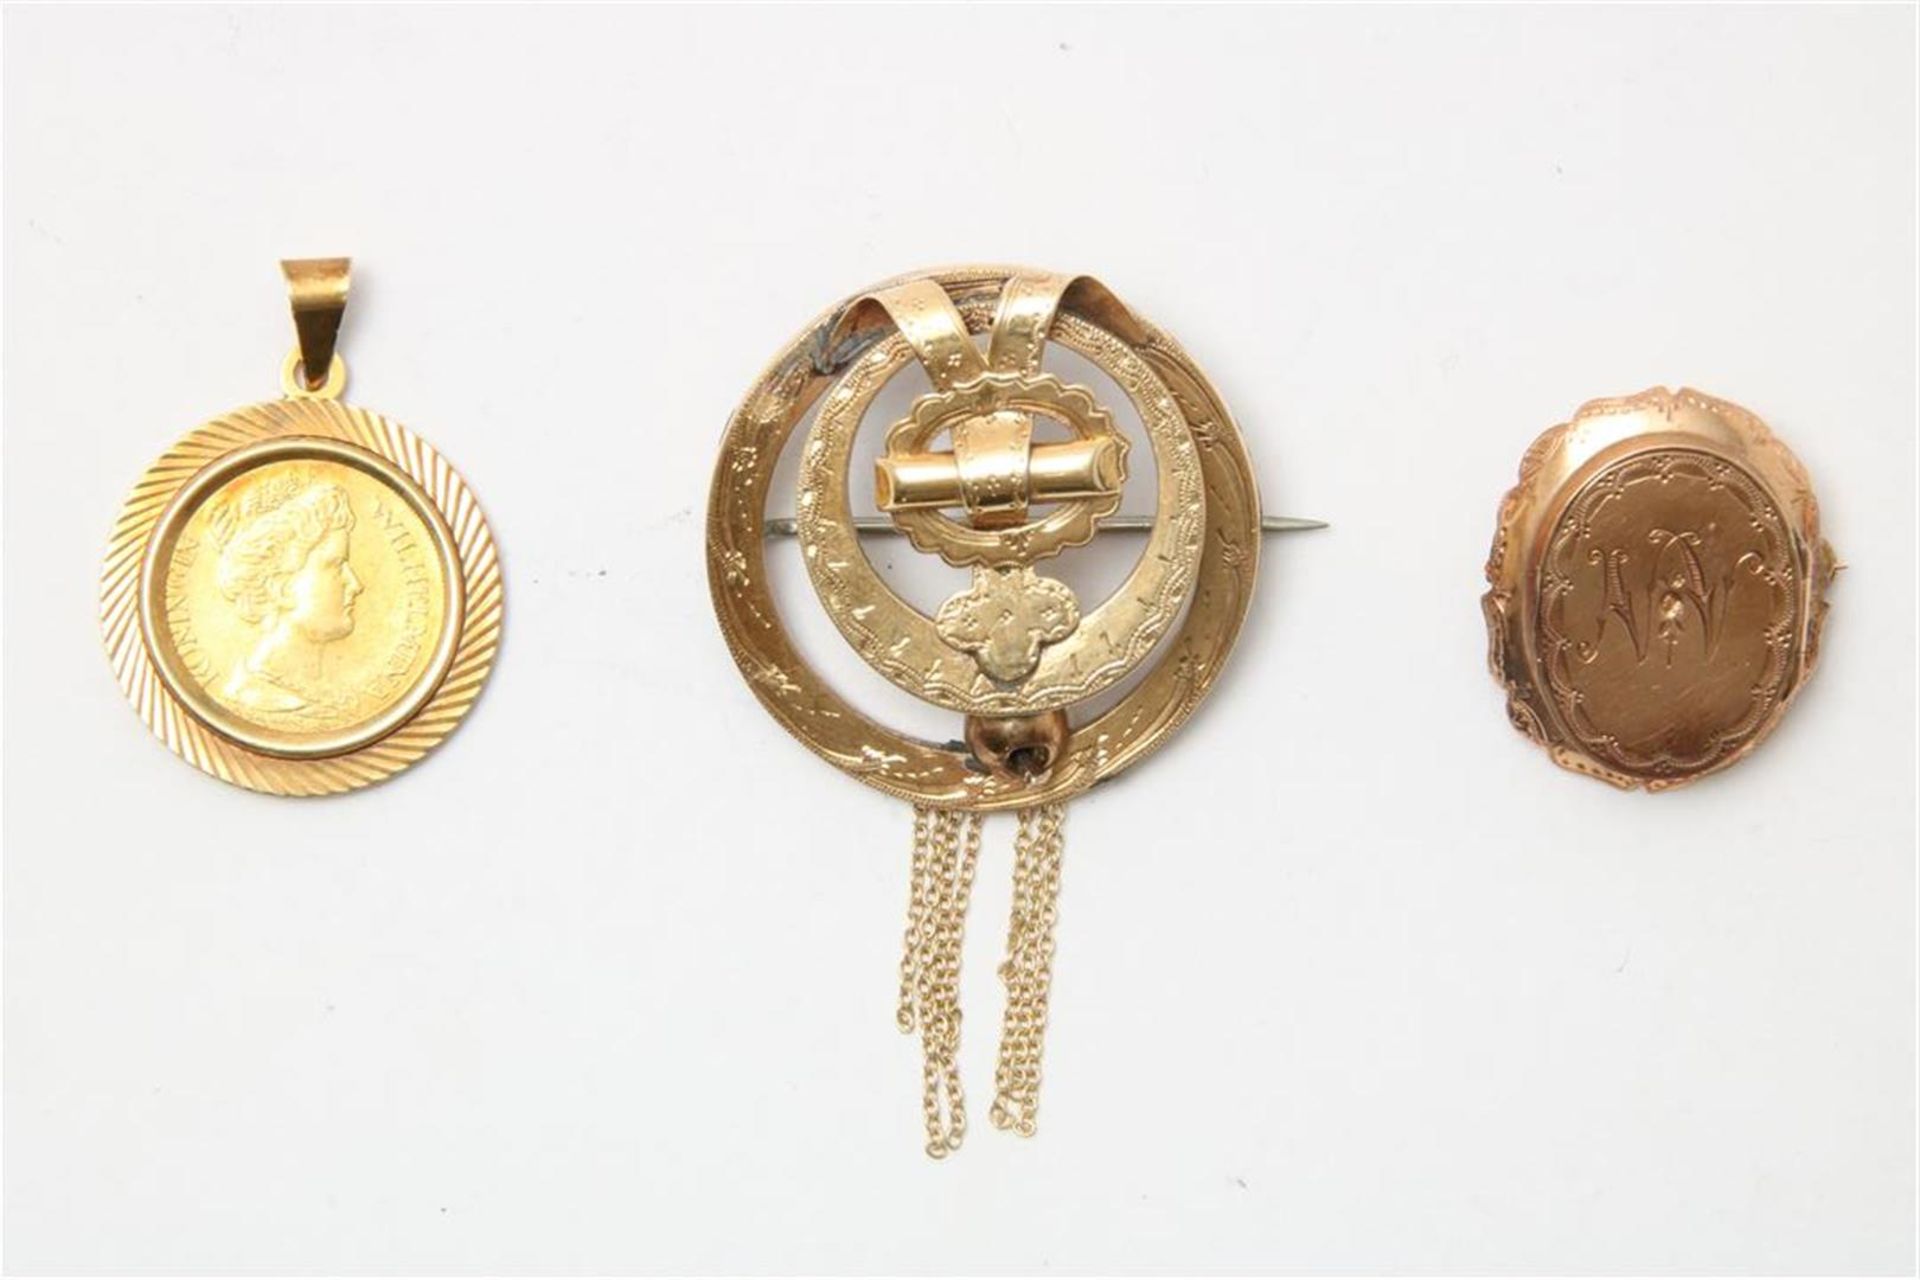 Golden coin and 2 brooches 